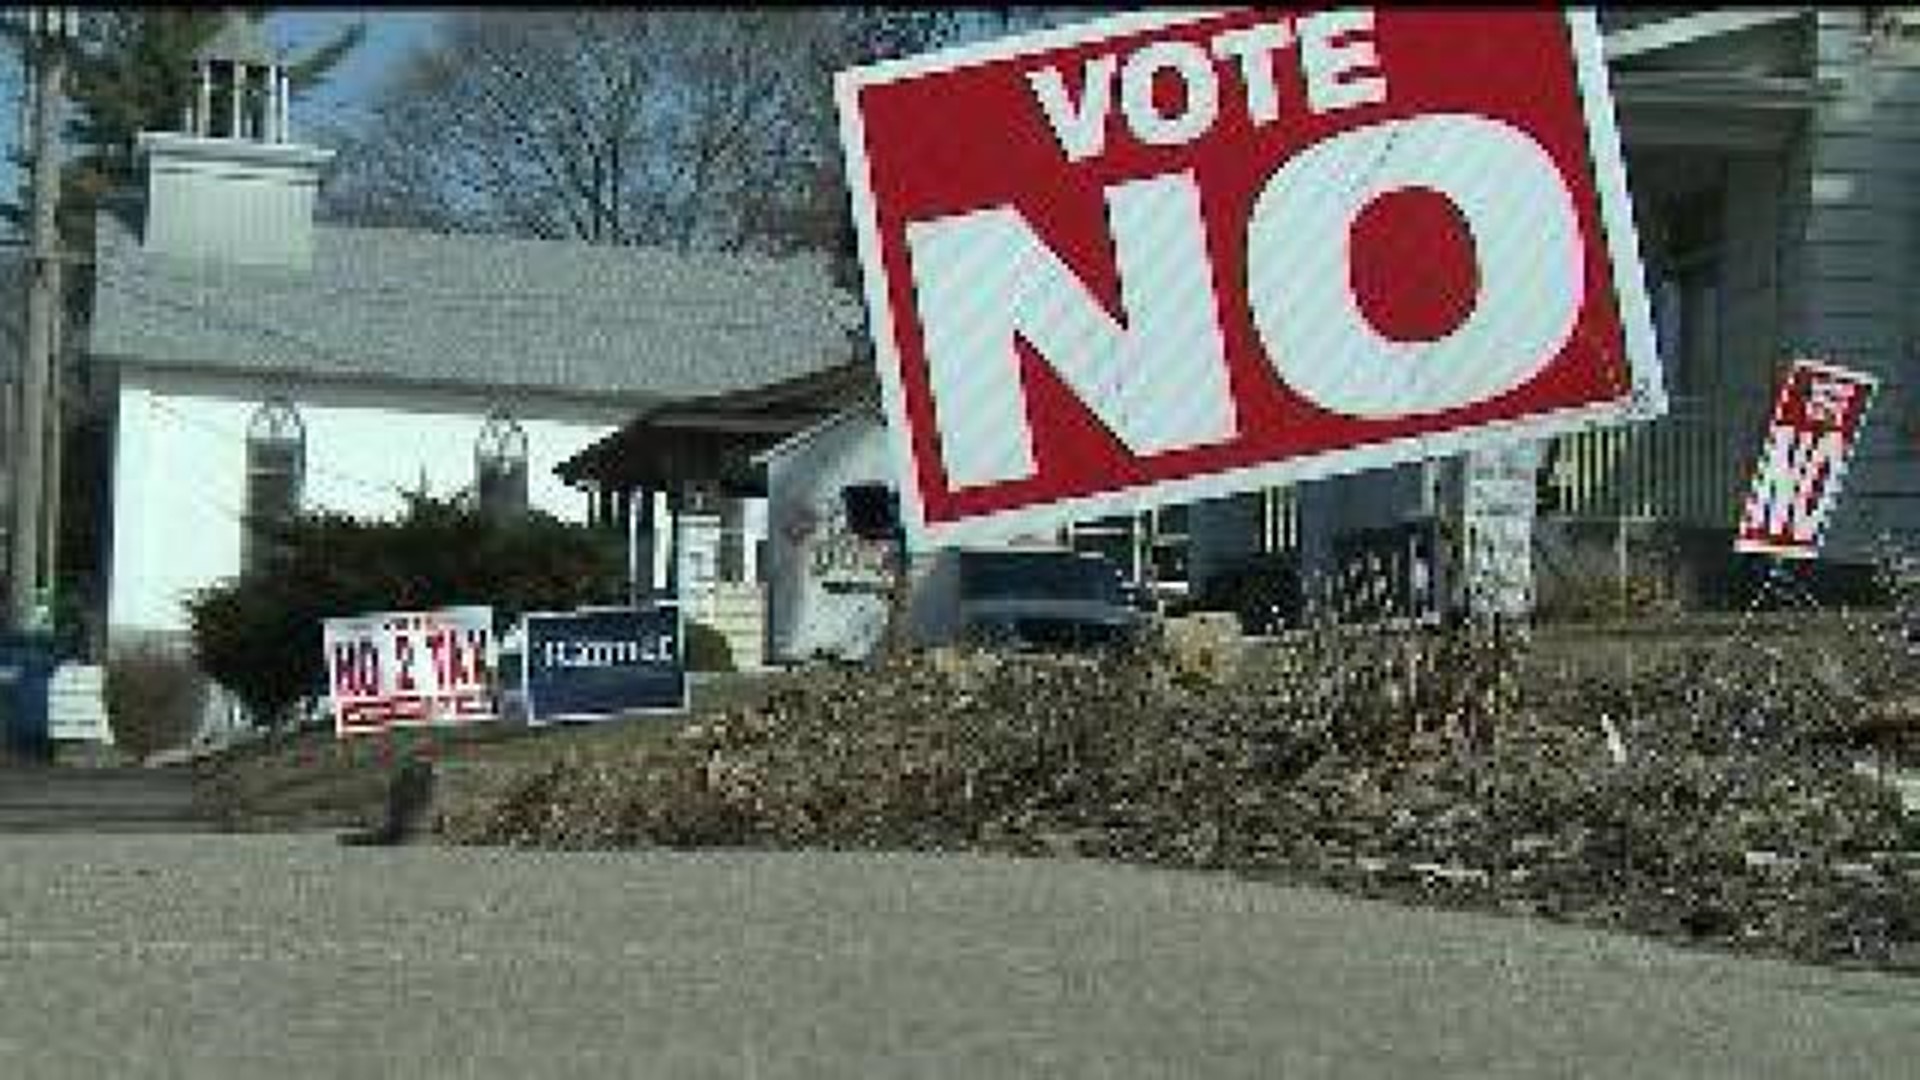 Reasons Why Some Oppose 1% County Sales Tax